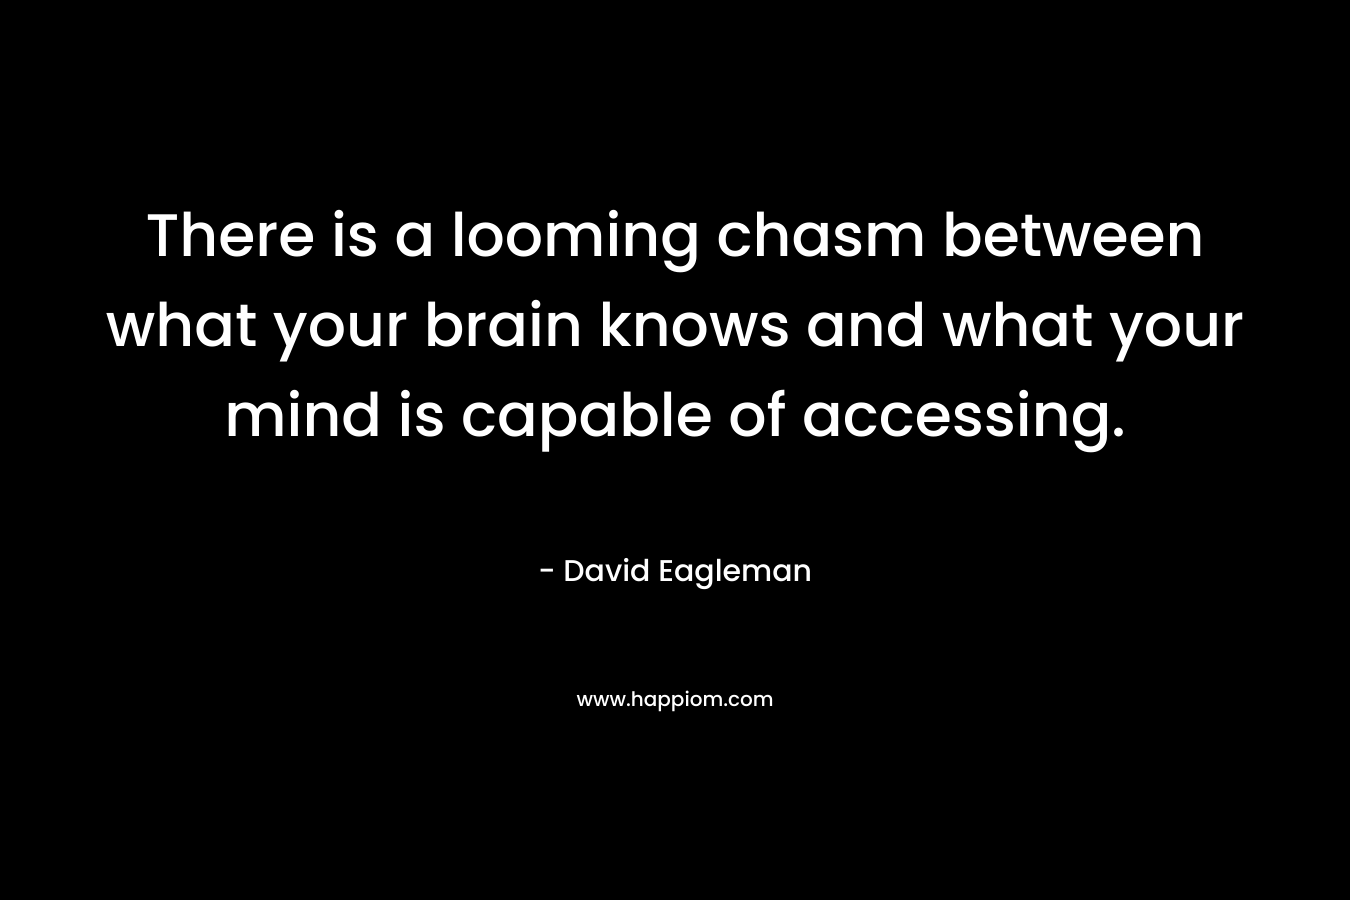 There is a looming chasm between what your brain knows and what your mind is capable of accessing. – David Eagleman